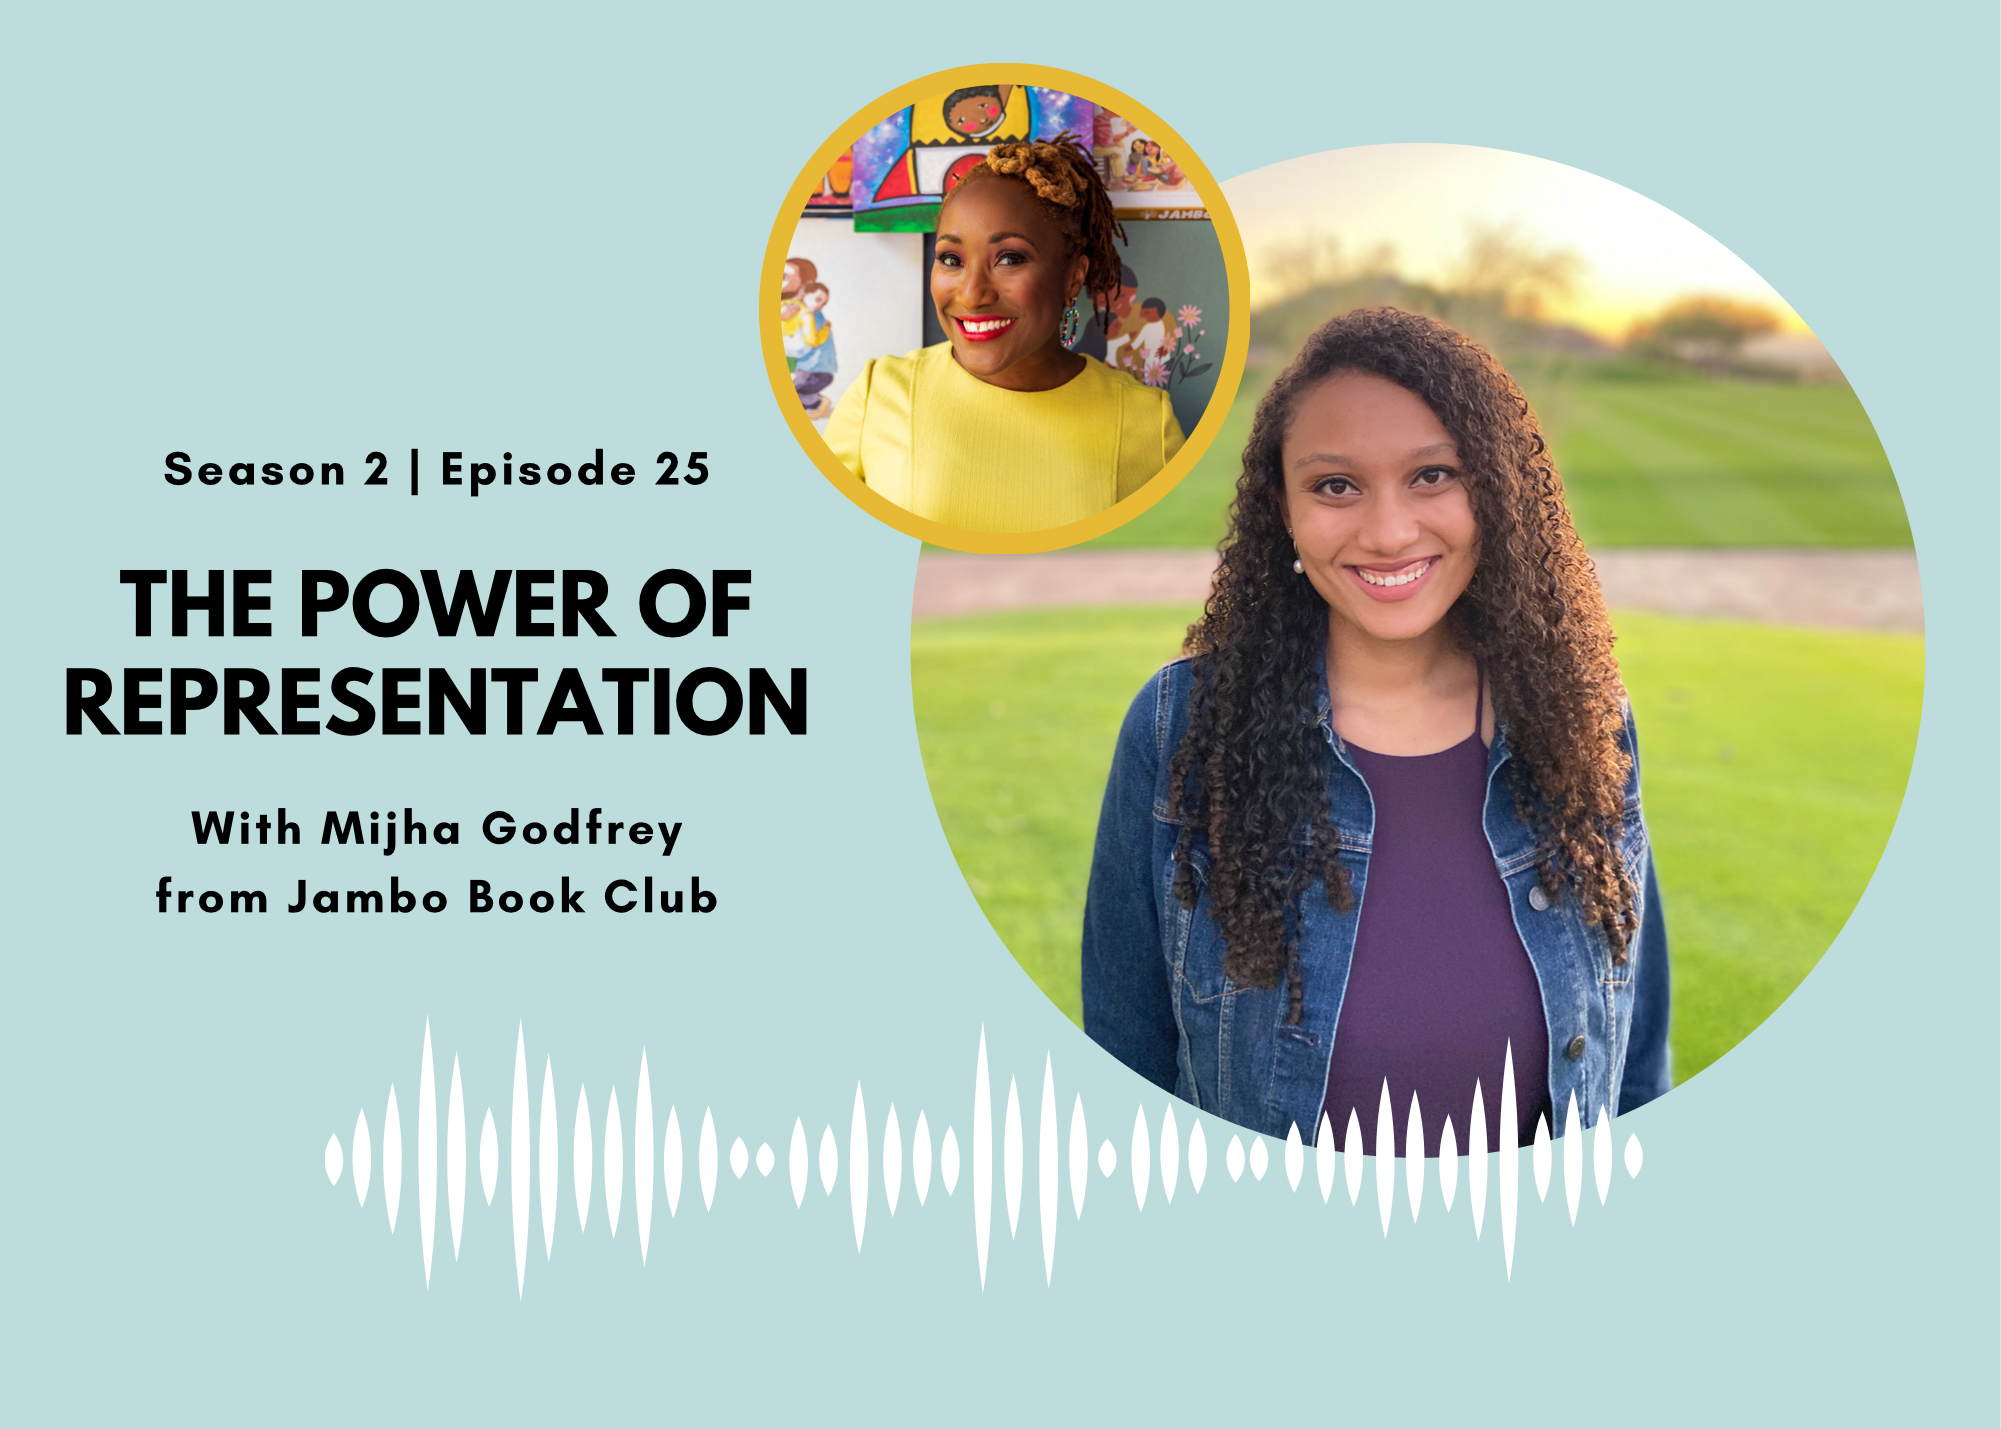 The Power of Representation with Mijha Godfrey from Jambo Book Club